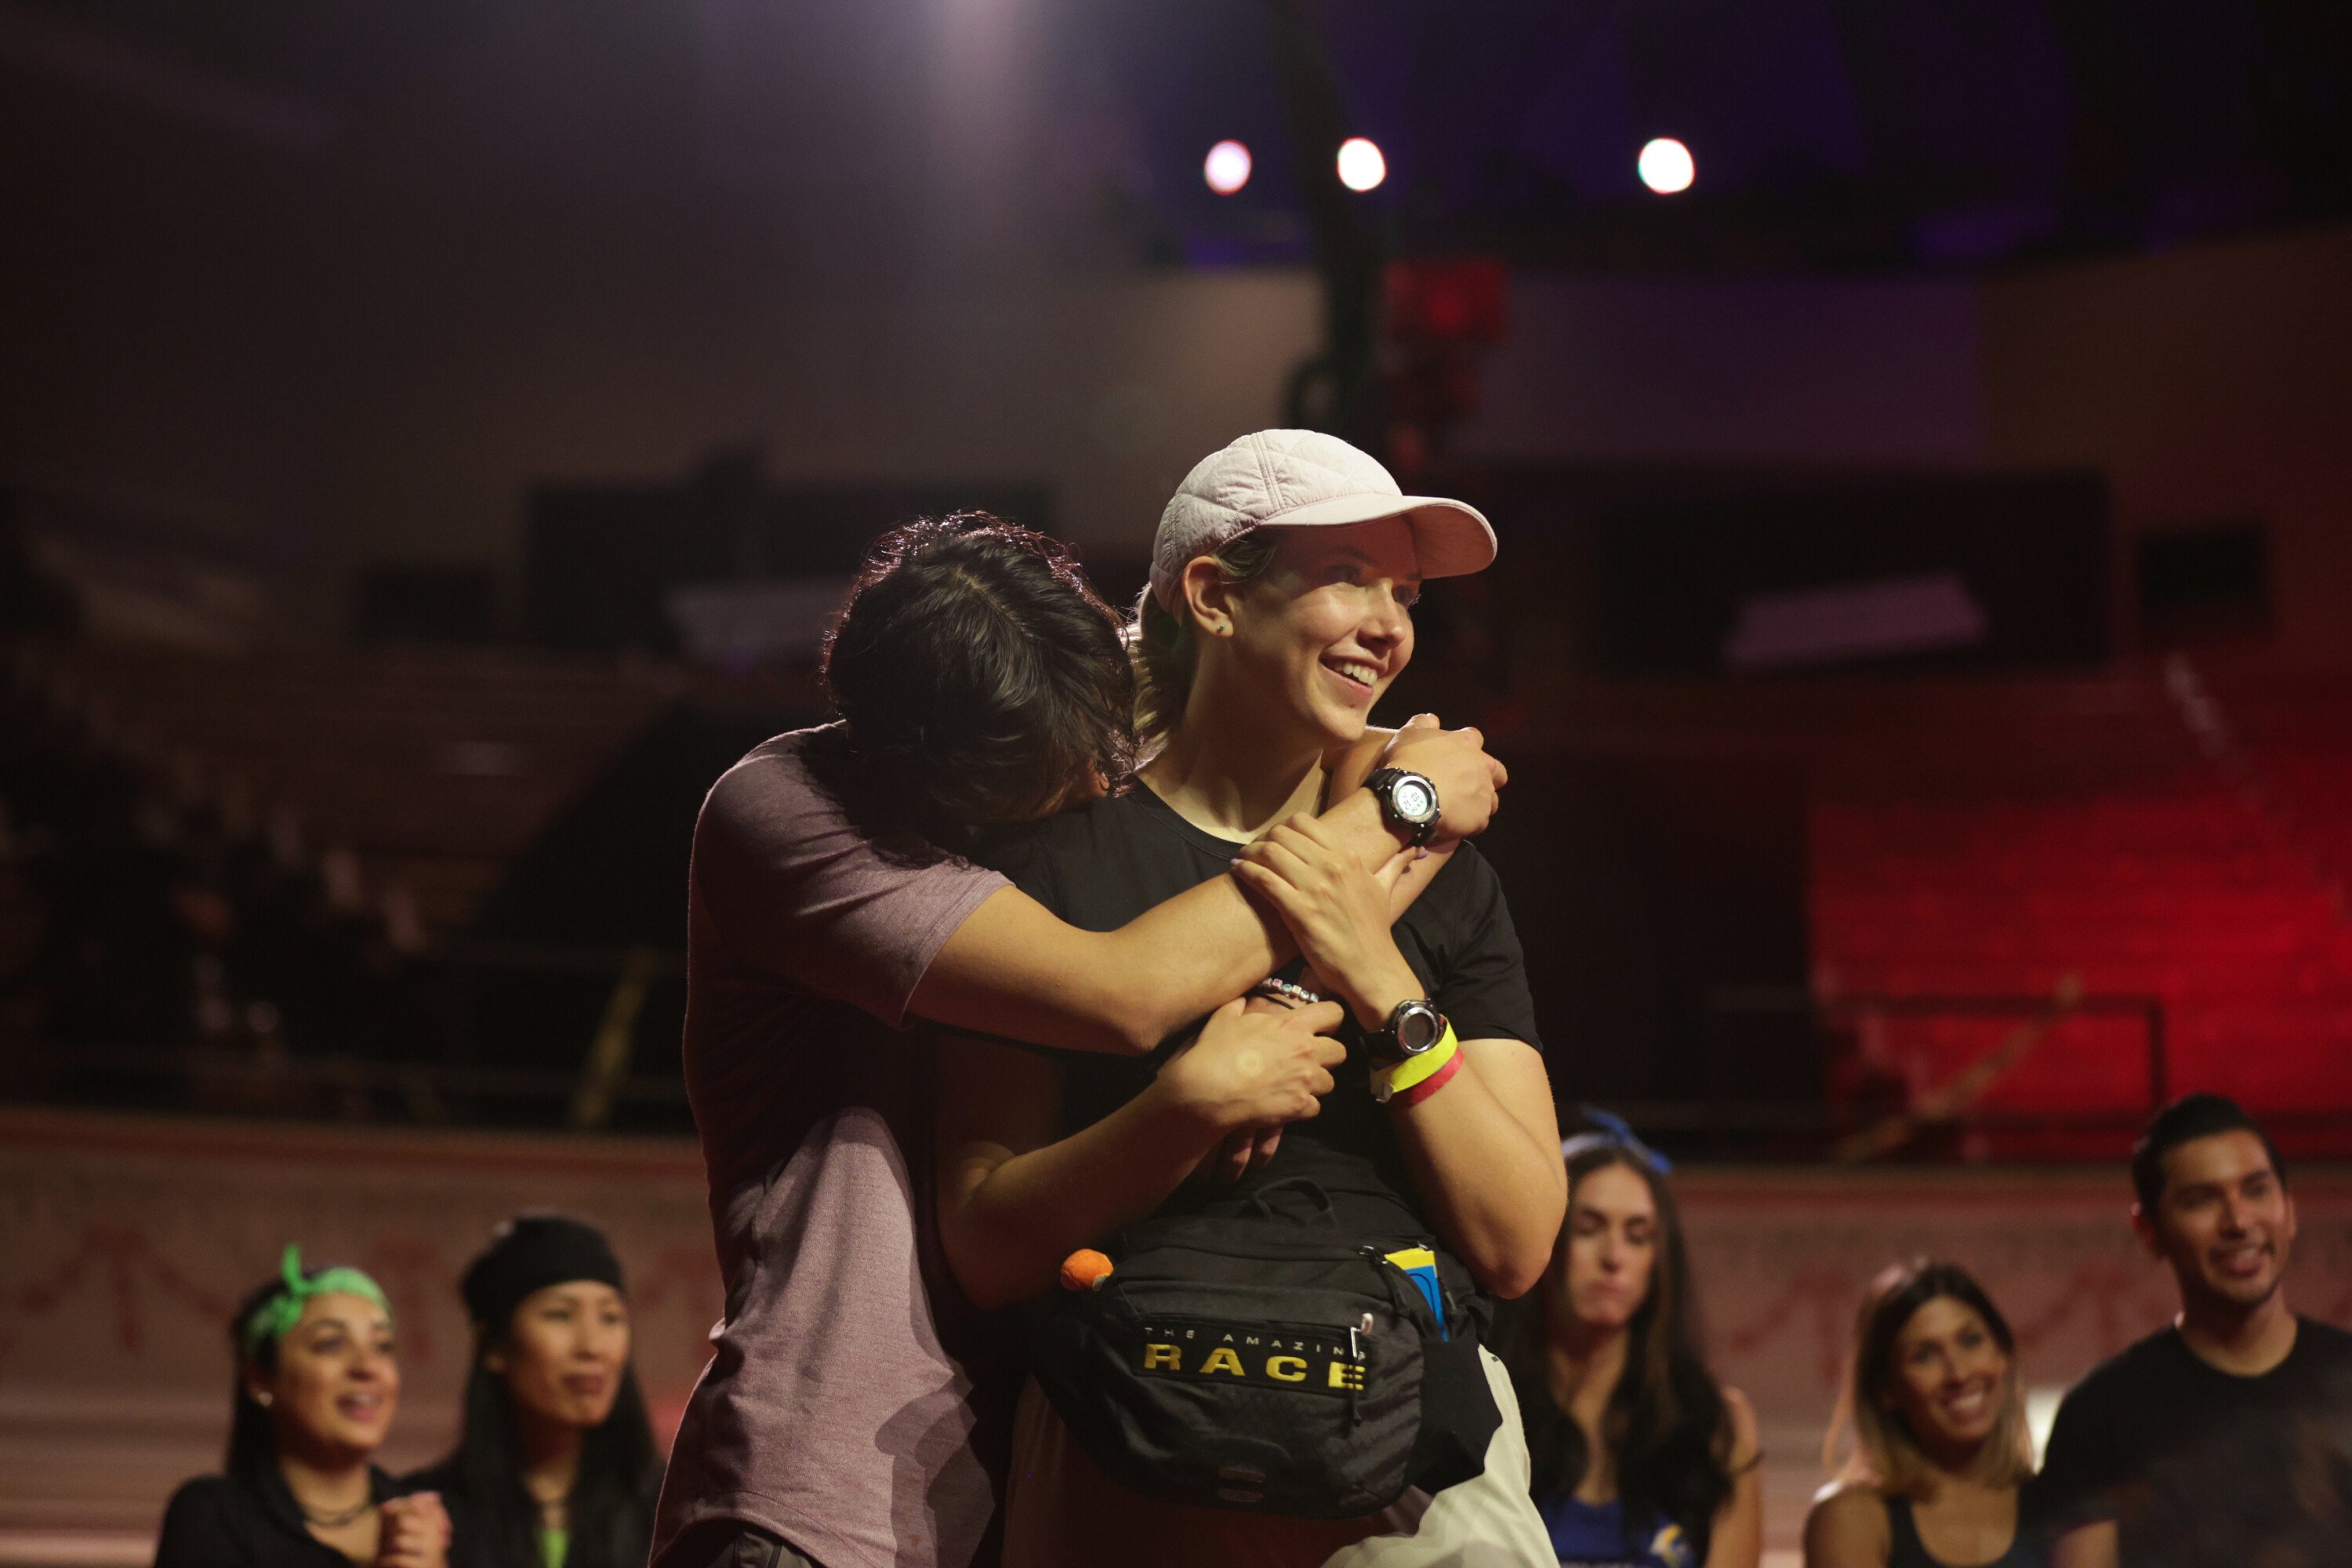 Derek Xiao and Claire Rehfuss, who won 'The Amazing Race' Season 34, hug after crossing the finish line. Derek wears a light purple shirt. Claire wears a black shirt and light purple baseball hat.